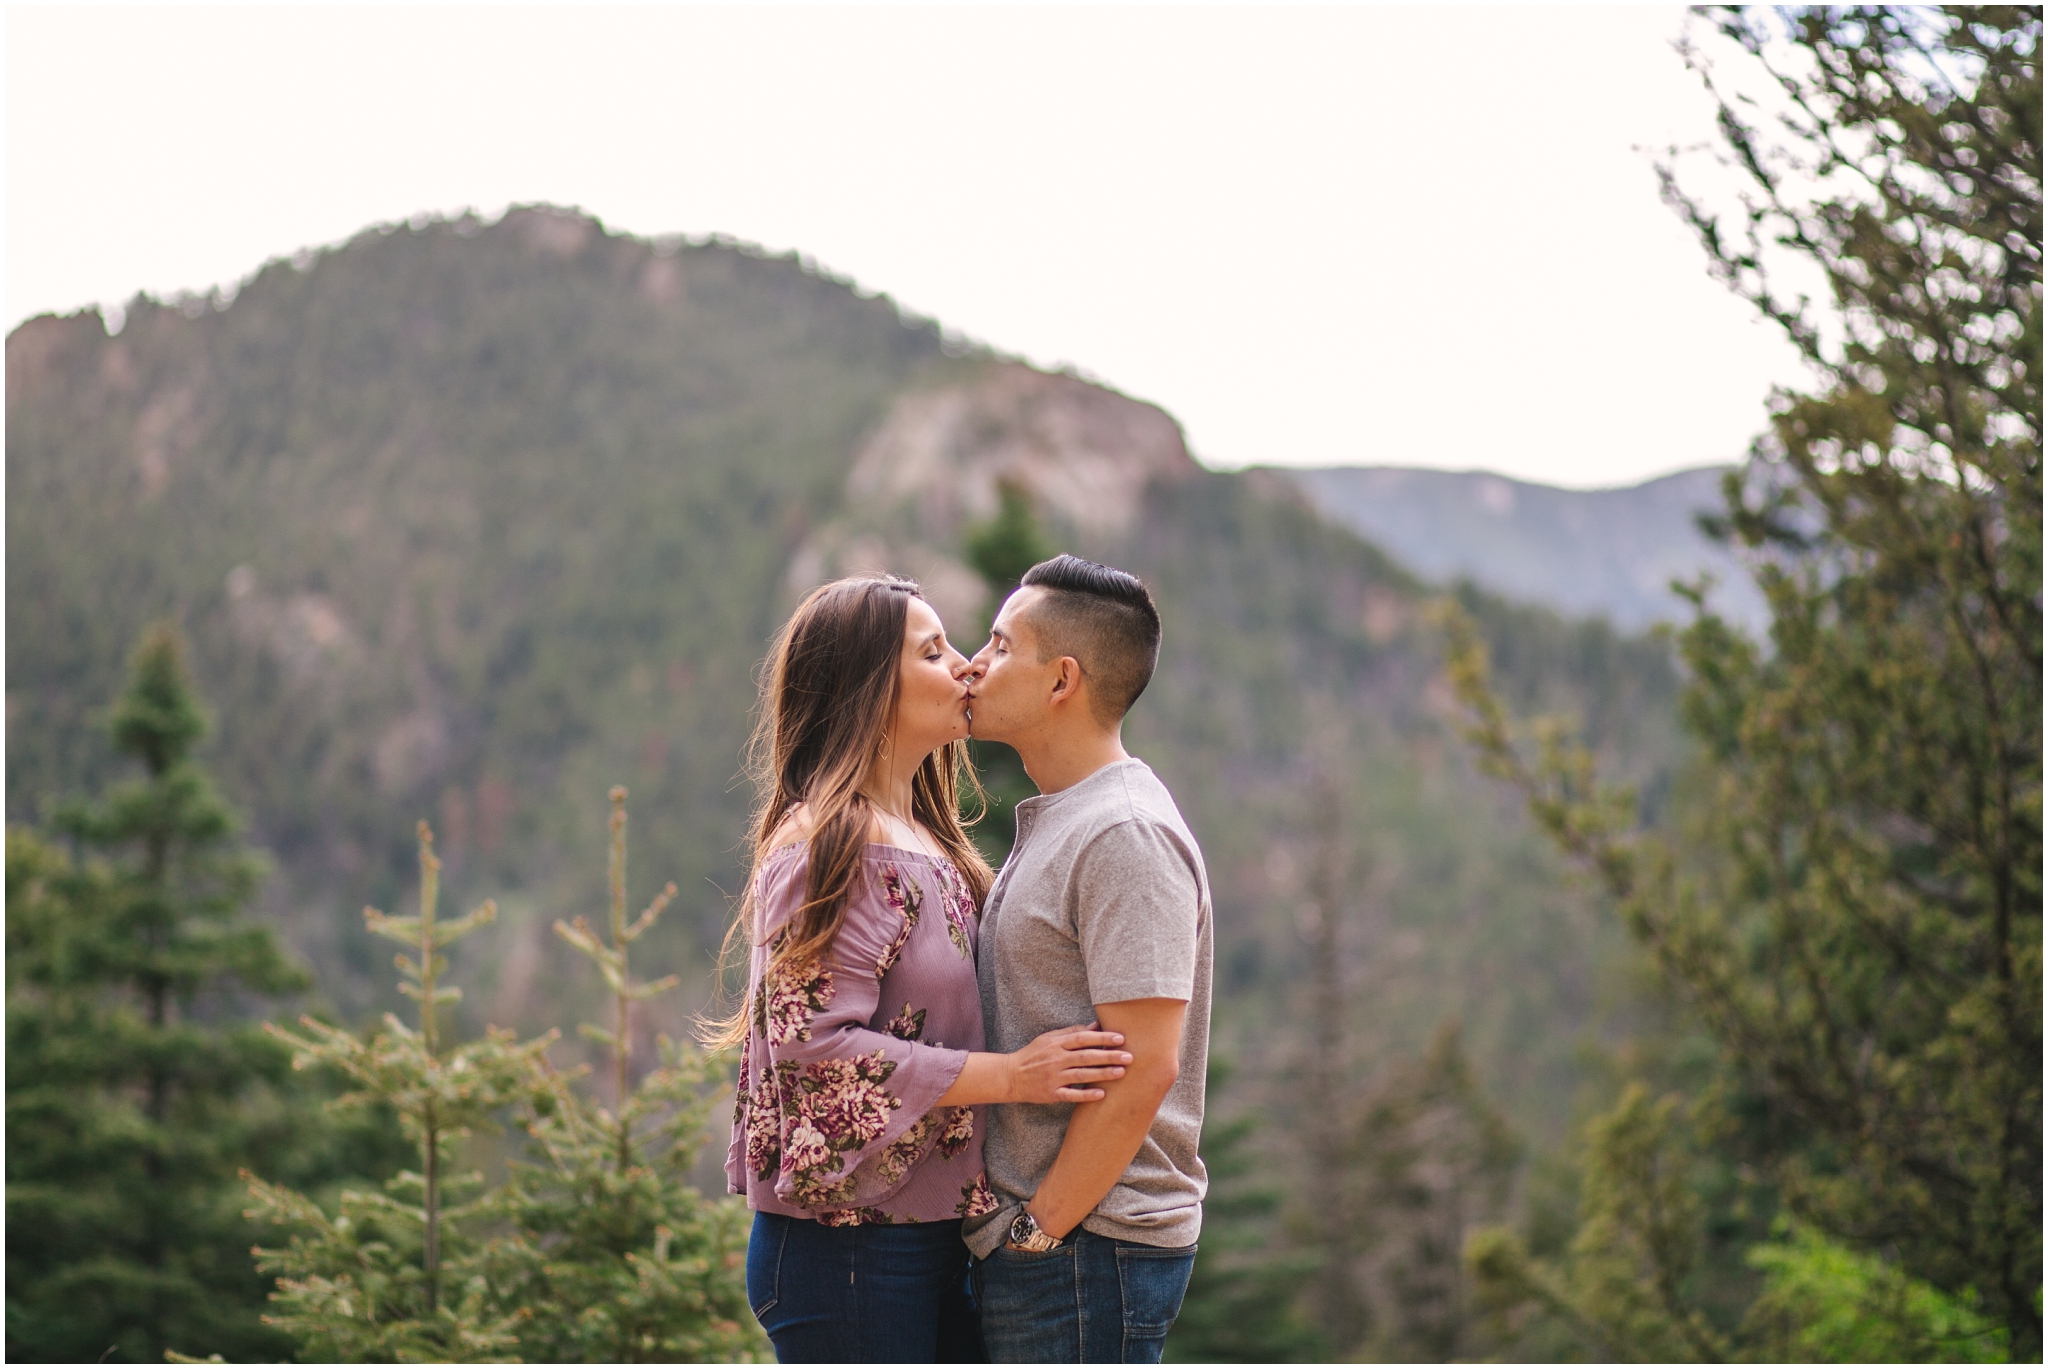 North Cheyenne Canon Park - Favorite Colorado Mountain Locations for Adventurous Engagement Pictures